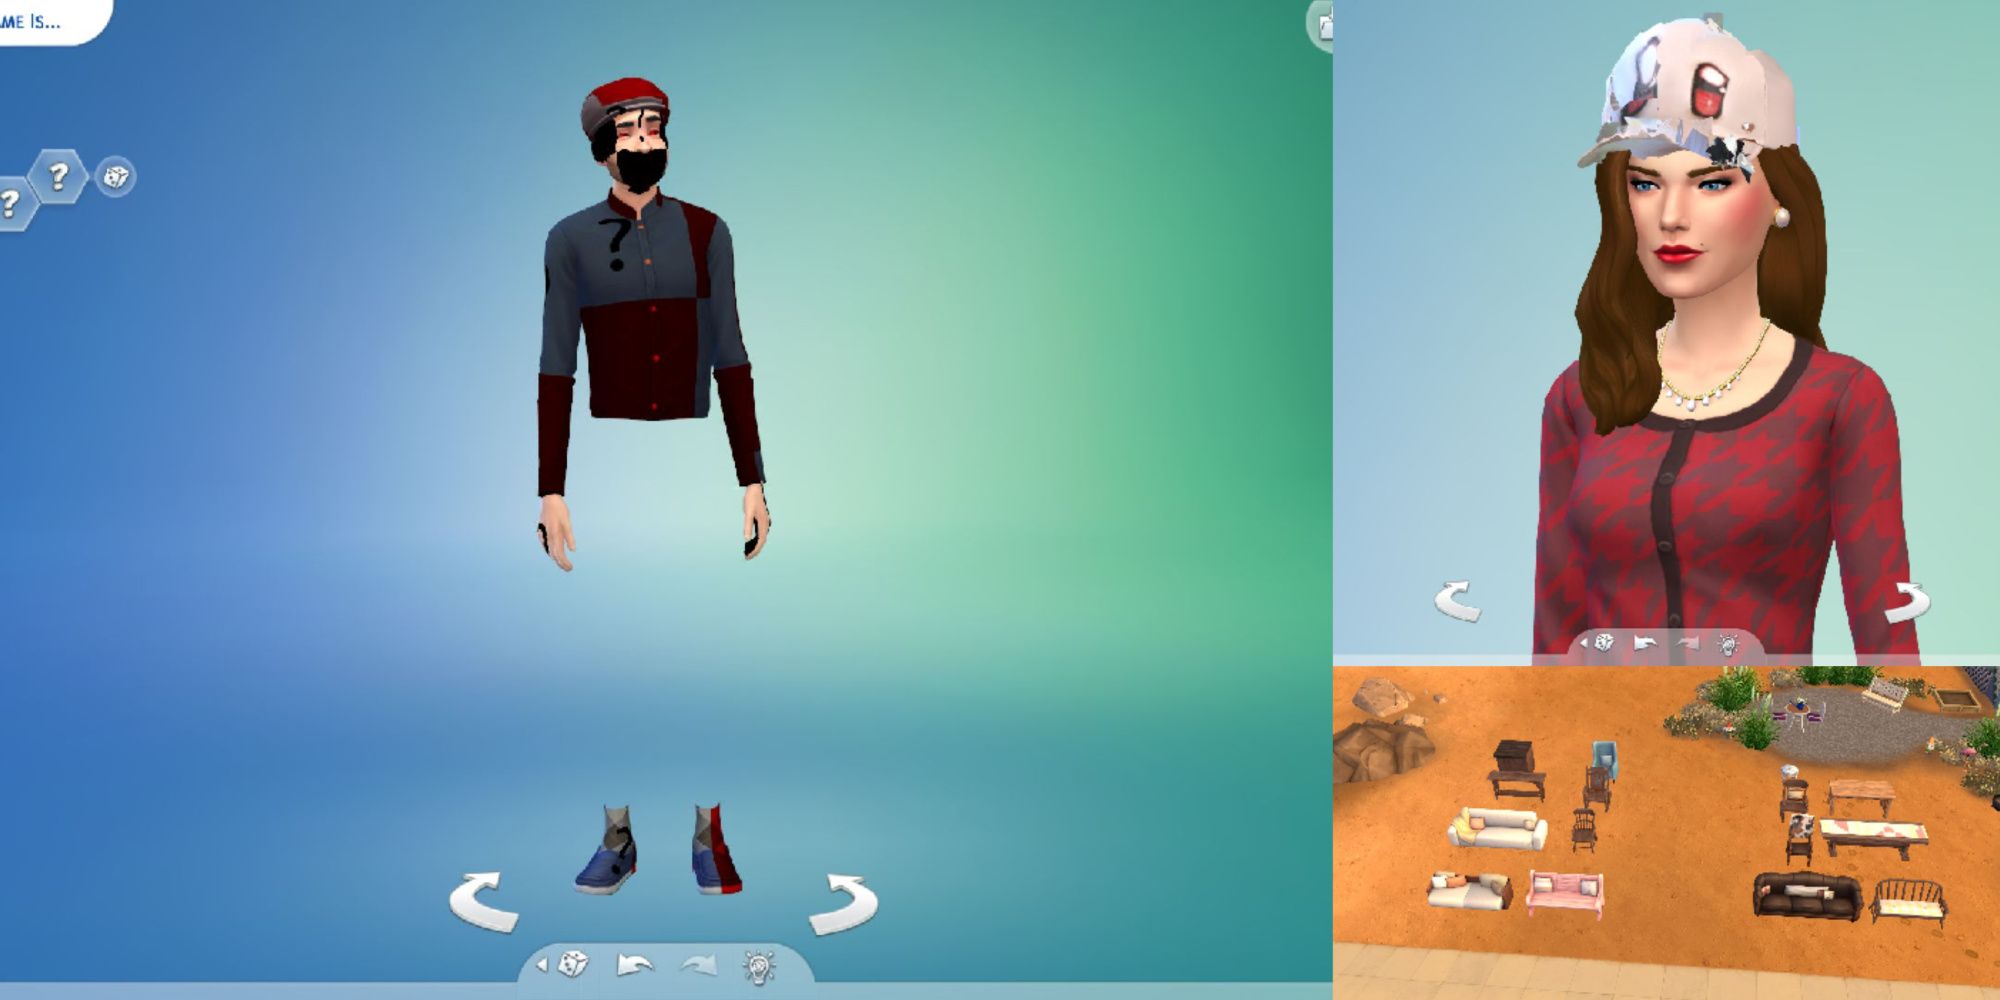 A photocollage of three Sims 4 images- a Sim whose legs are missing and who's covered in question marks, a Sim wearing a glitchy-looking hat, and a bunch of Sims chairs split into two piles on the lawn.